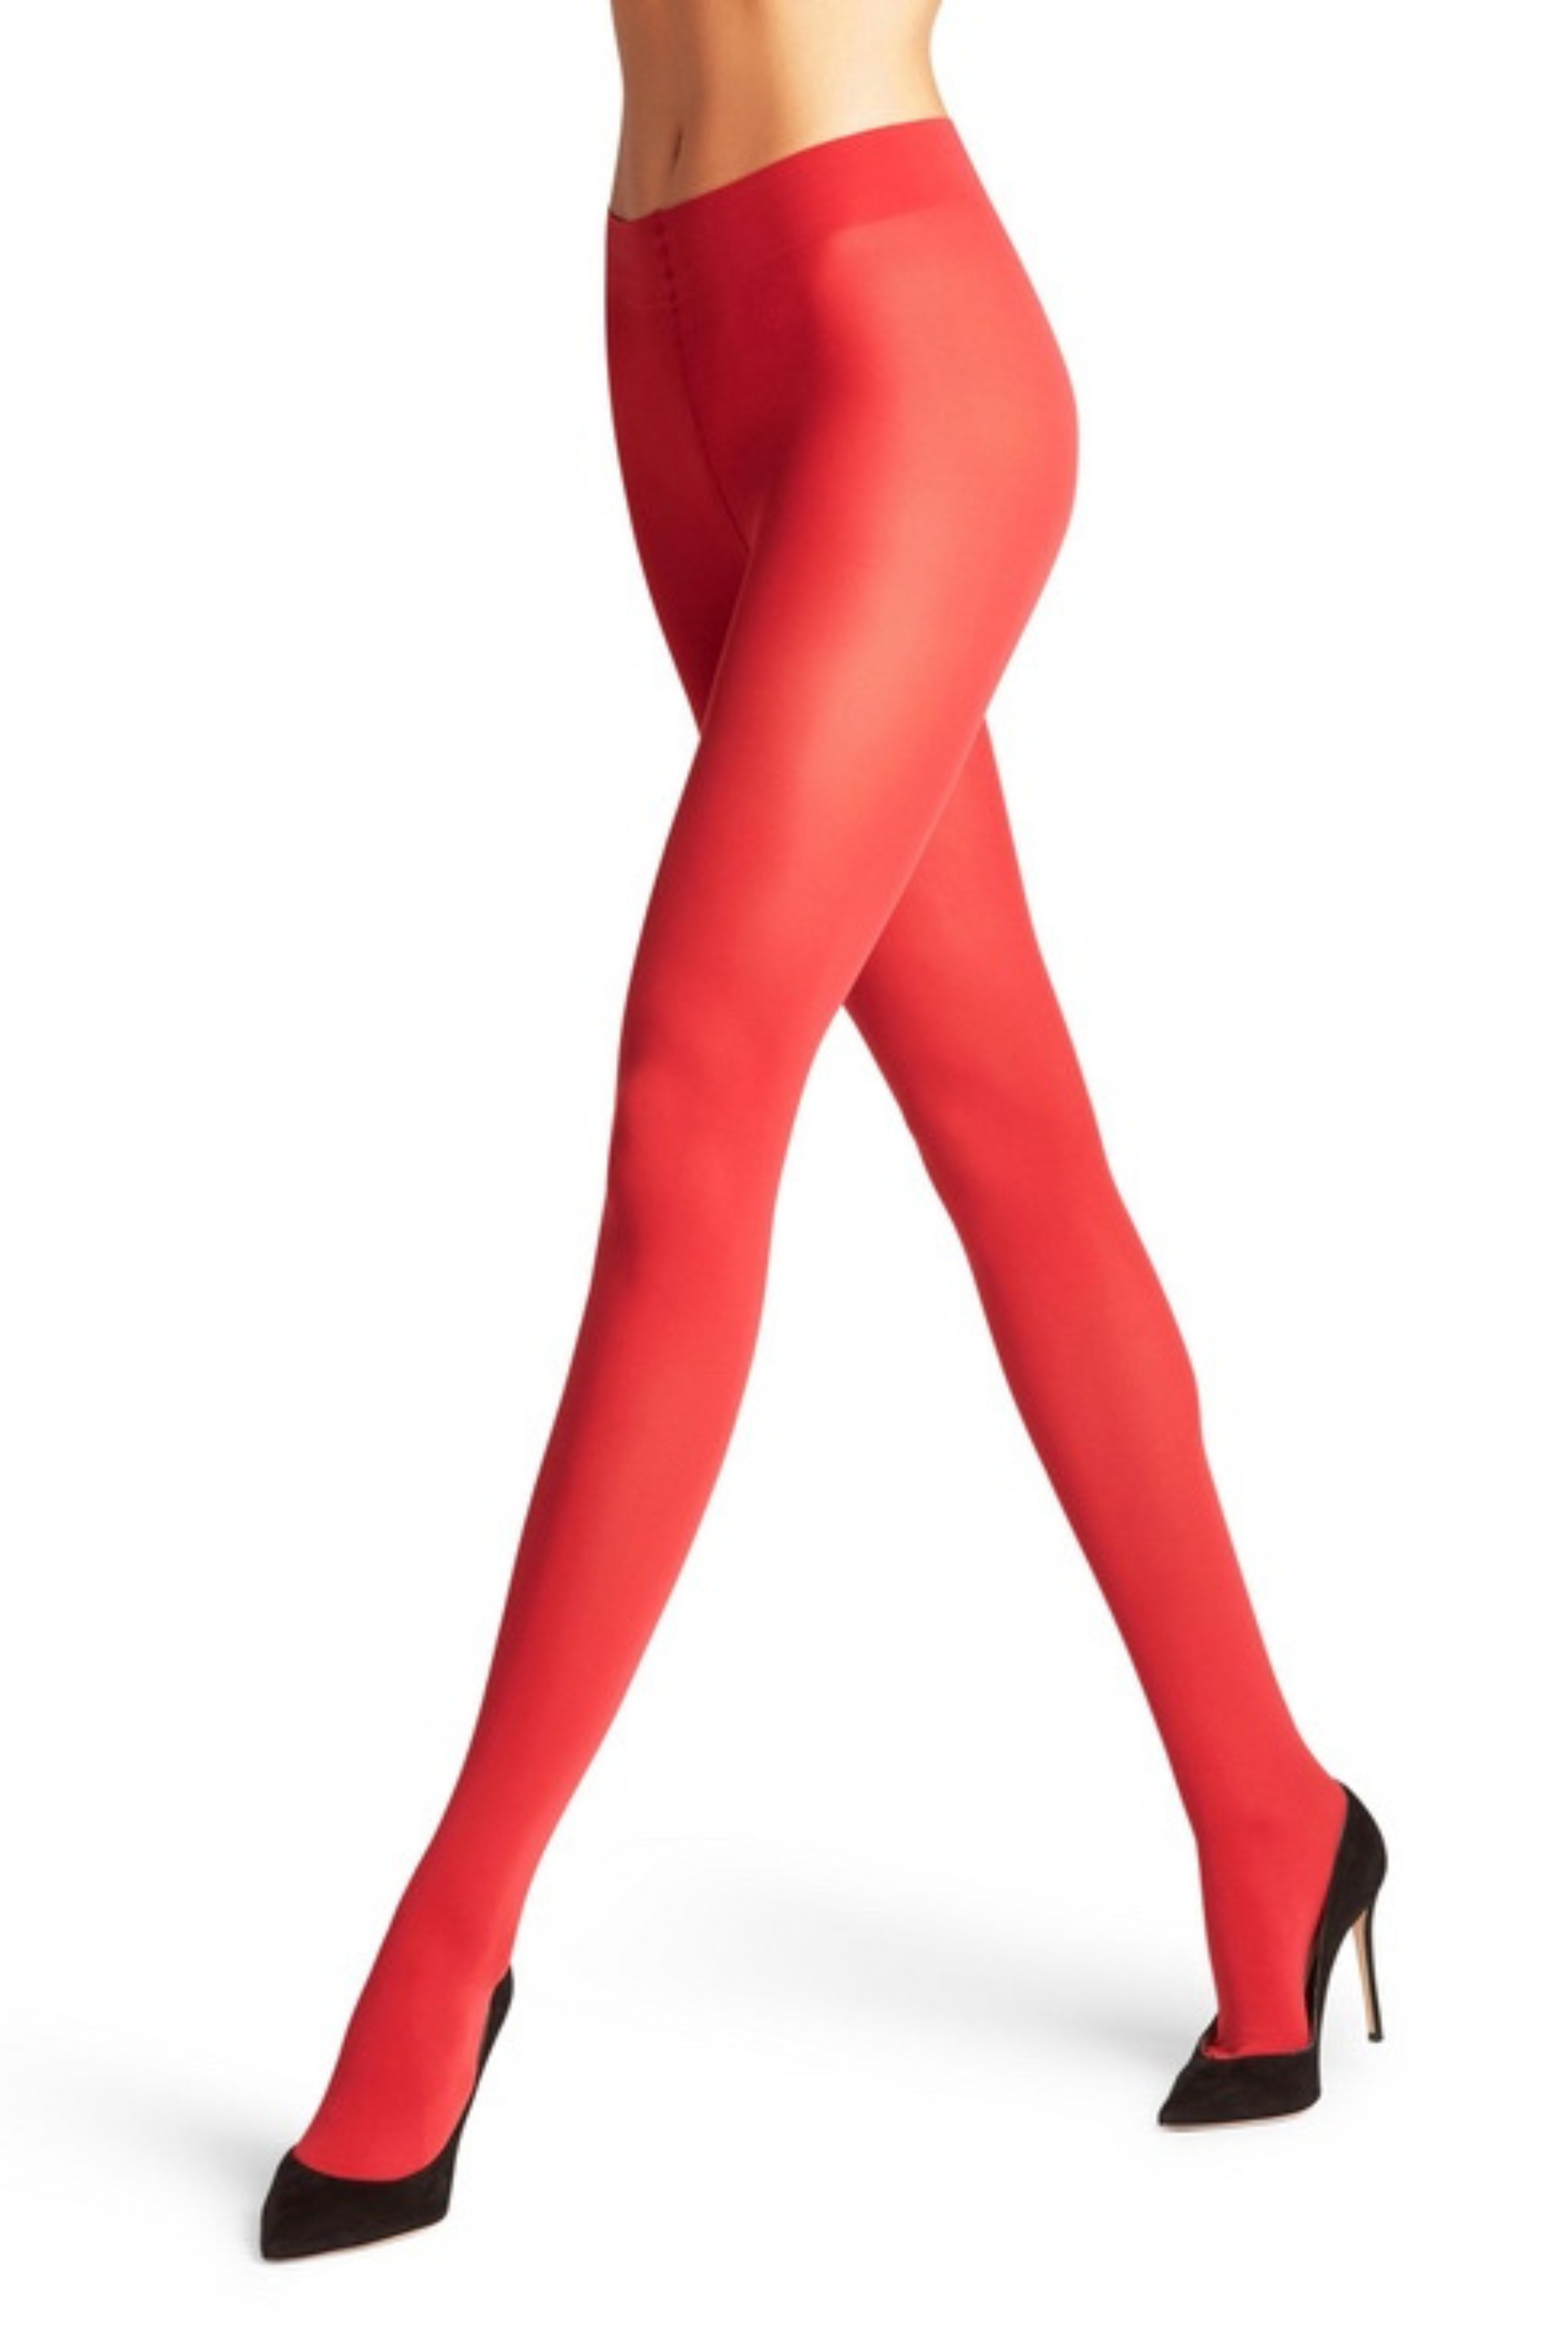 Off The Runway Red Tights (FINAL SALE)